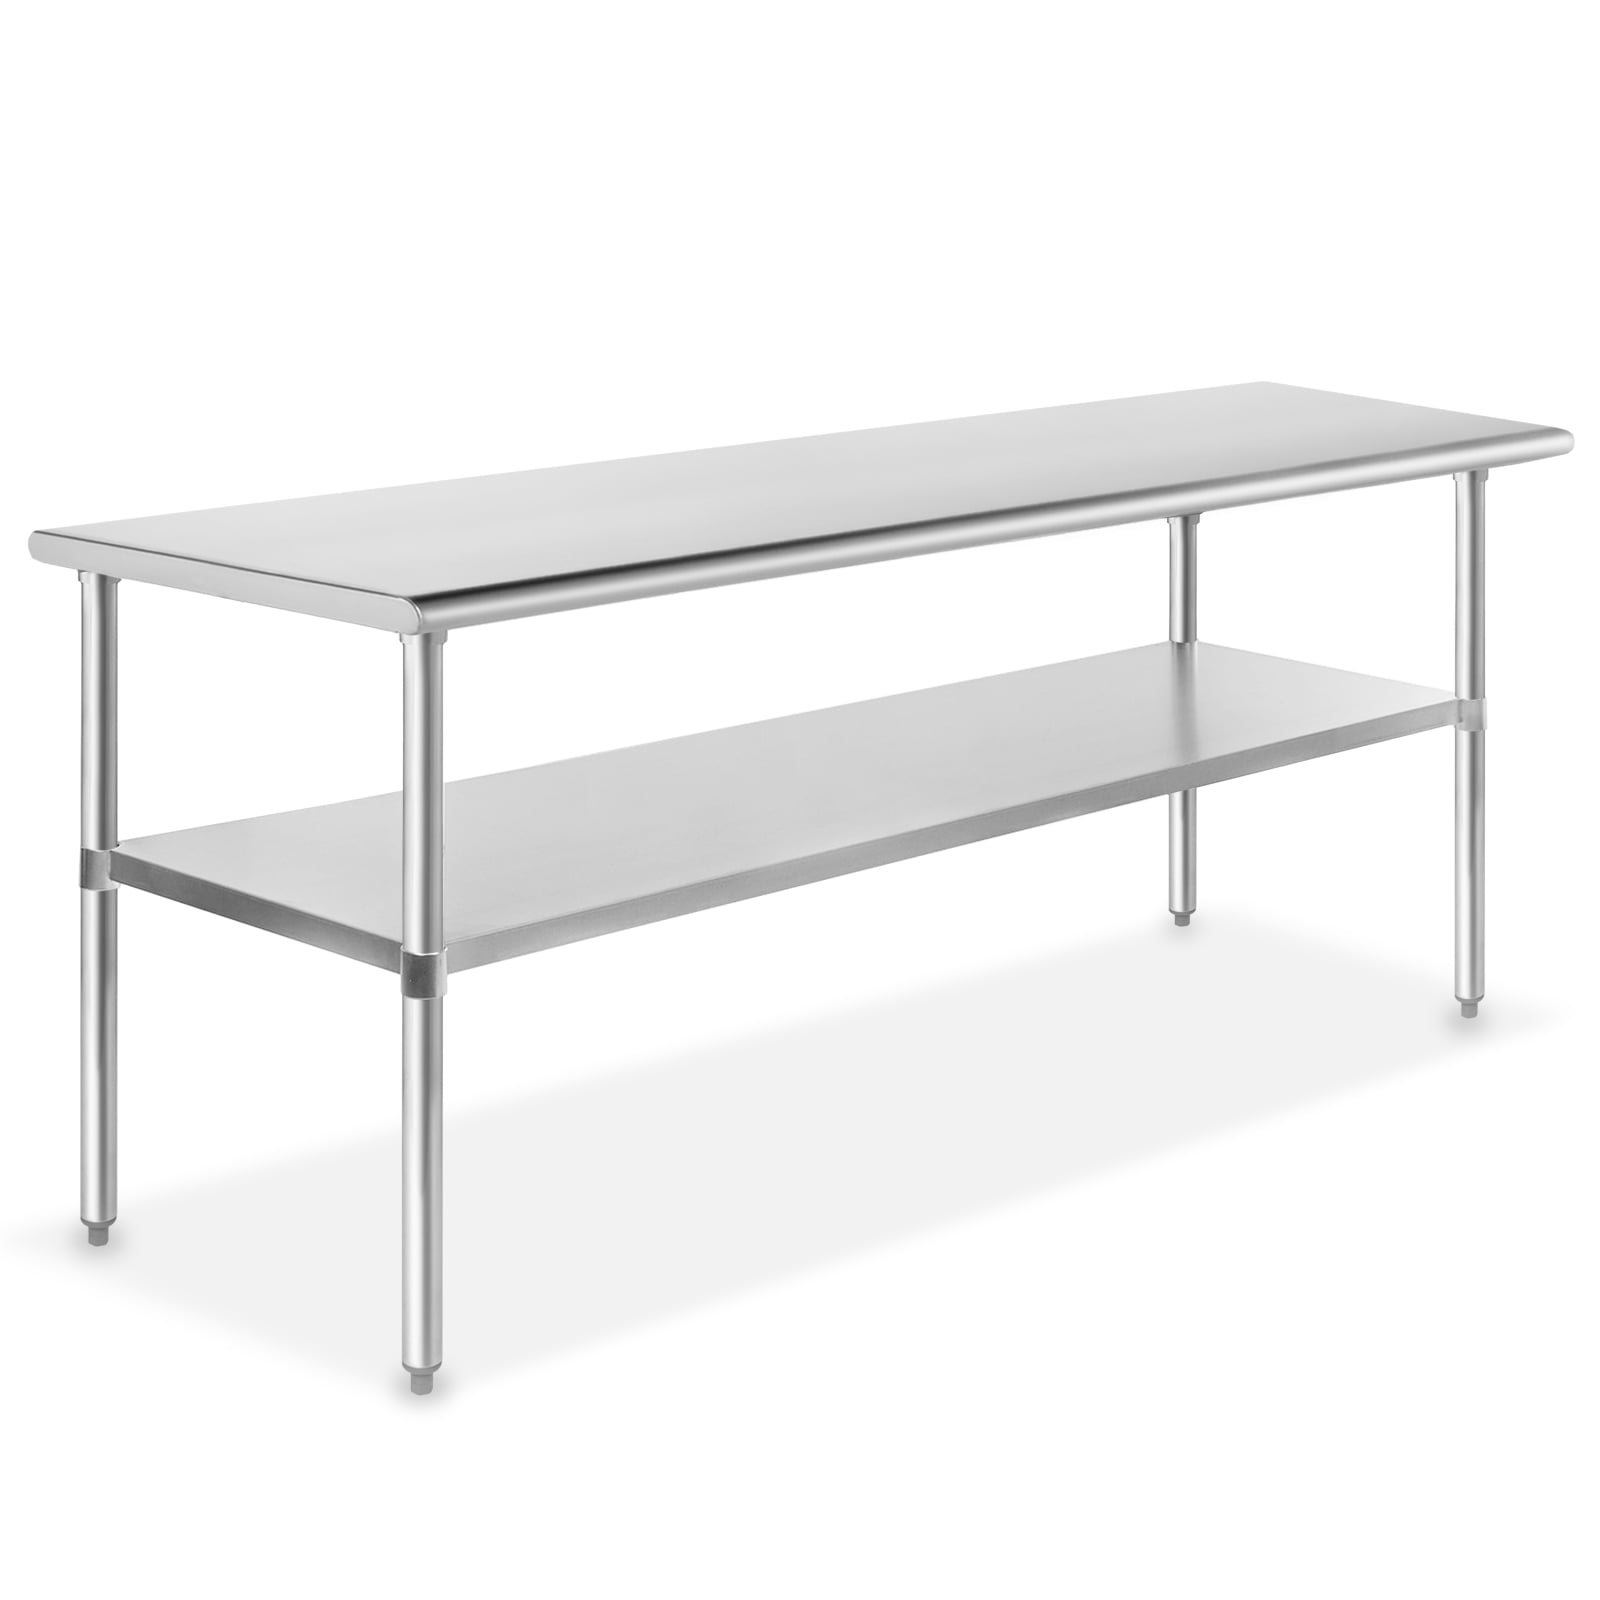 GRIDMANN NSF Stainless Steel Commercial Kitchen Prep & Work Table - 60 Stainless Steel Commercial Prep Table